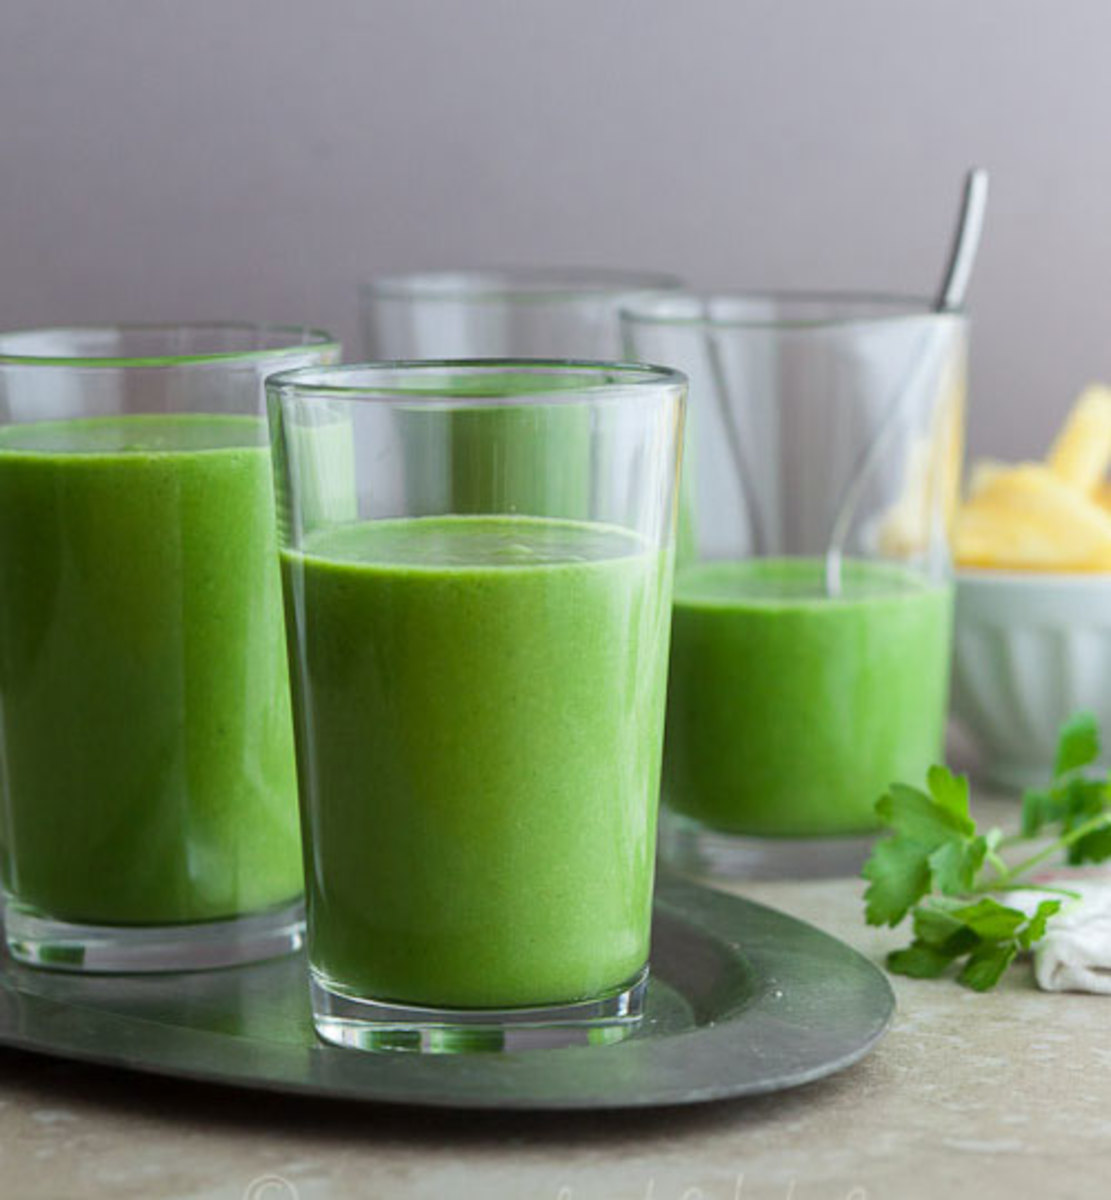 Healthy Green Smoothies to Lose Weight 